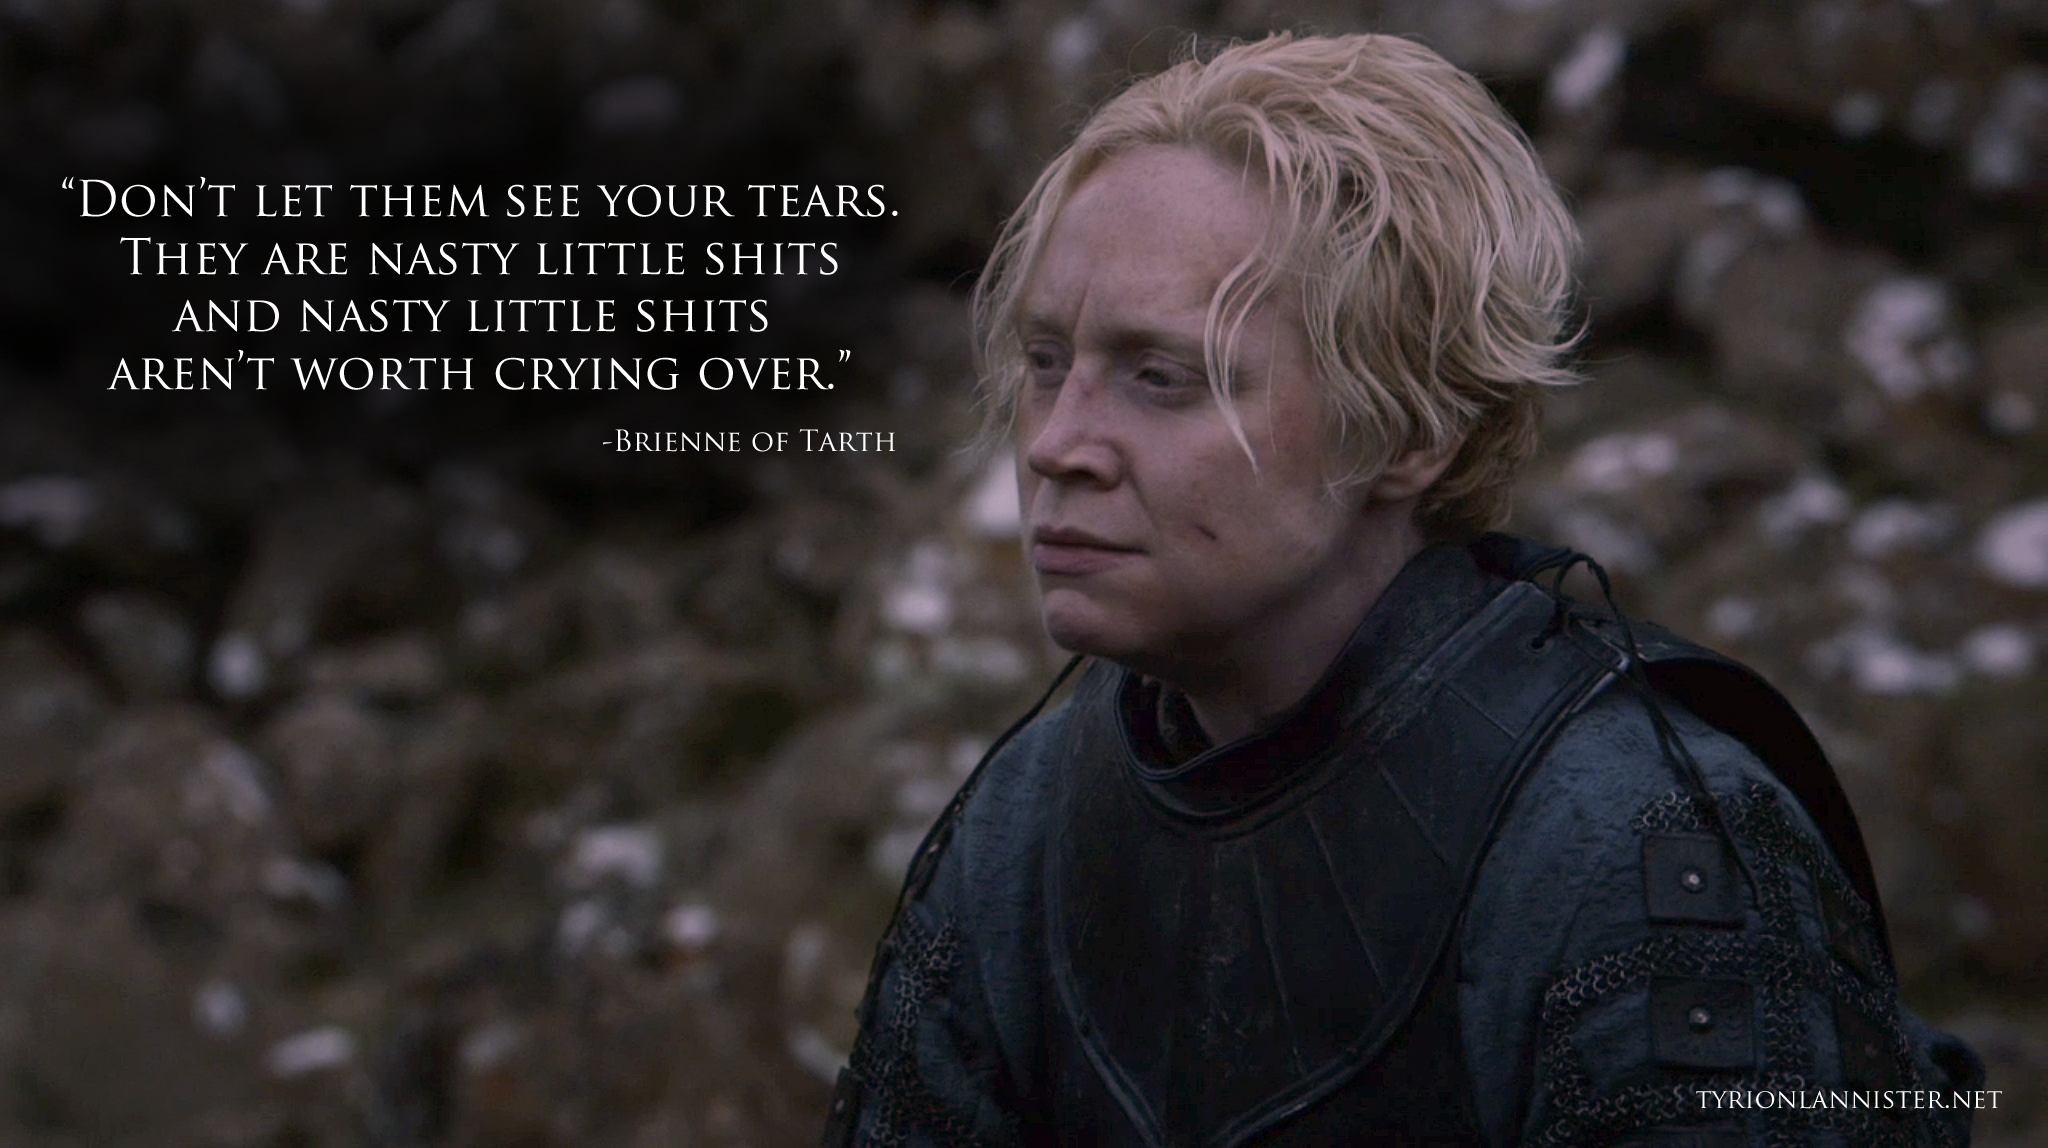 People 2048x1148 Gwendoline Christie brienne of tarth quote A Song of Ice and Fire